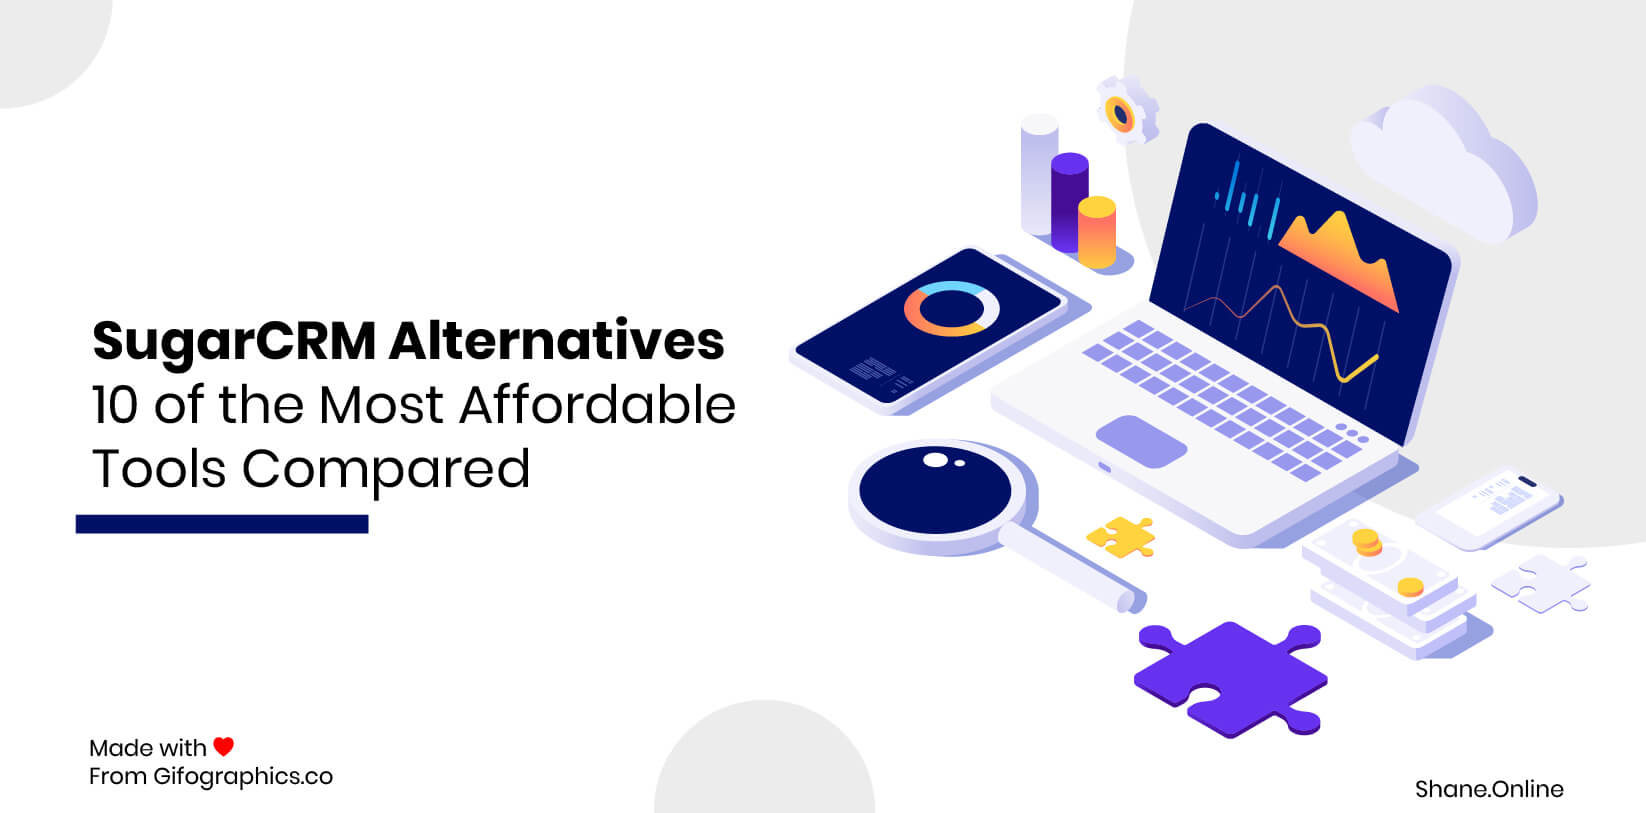 SugarCRM Alternatives 10 of the Most Affordable Tools Compared